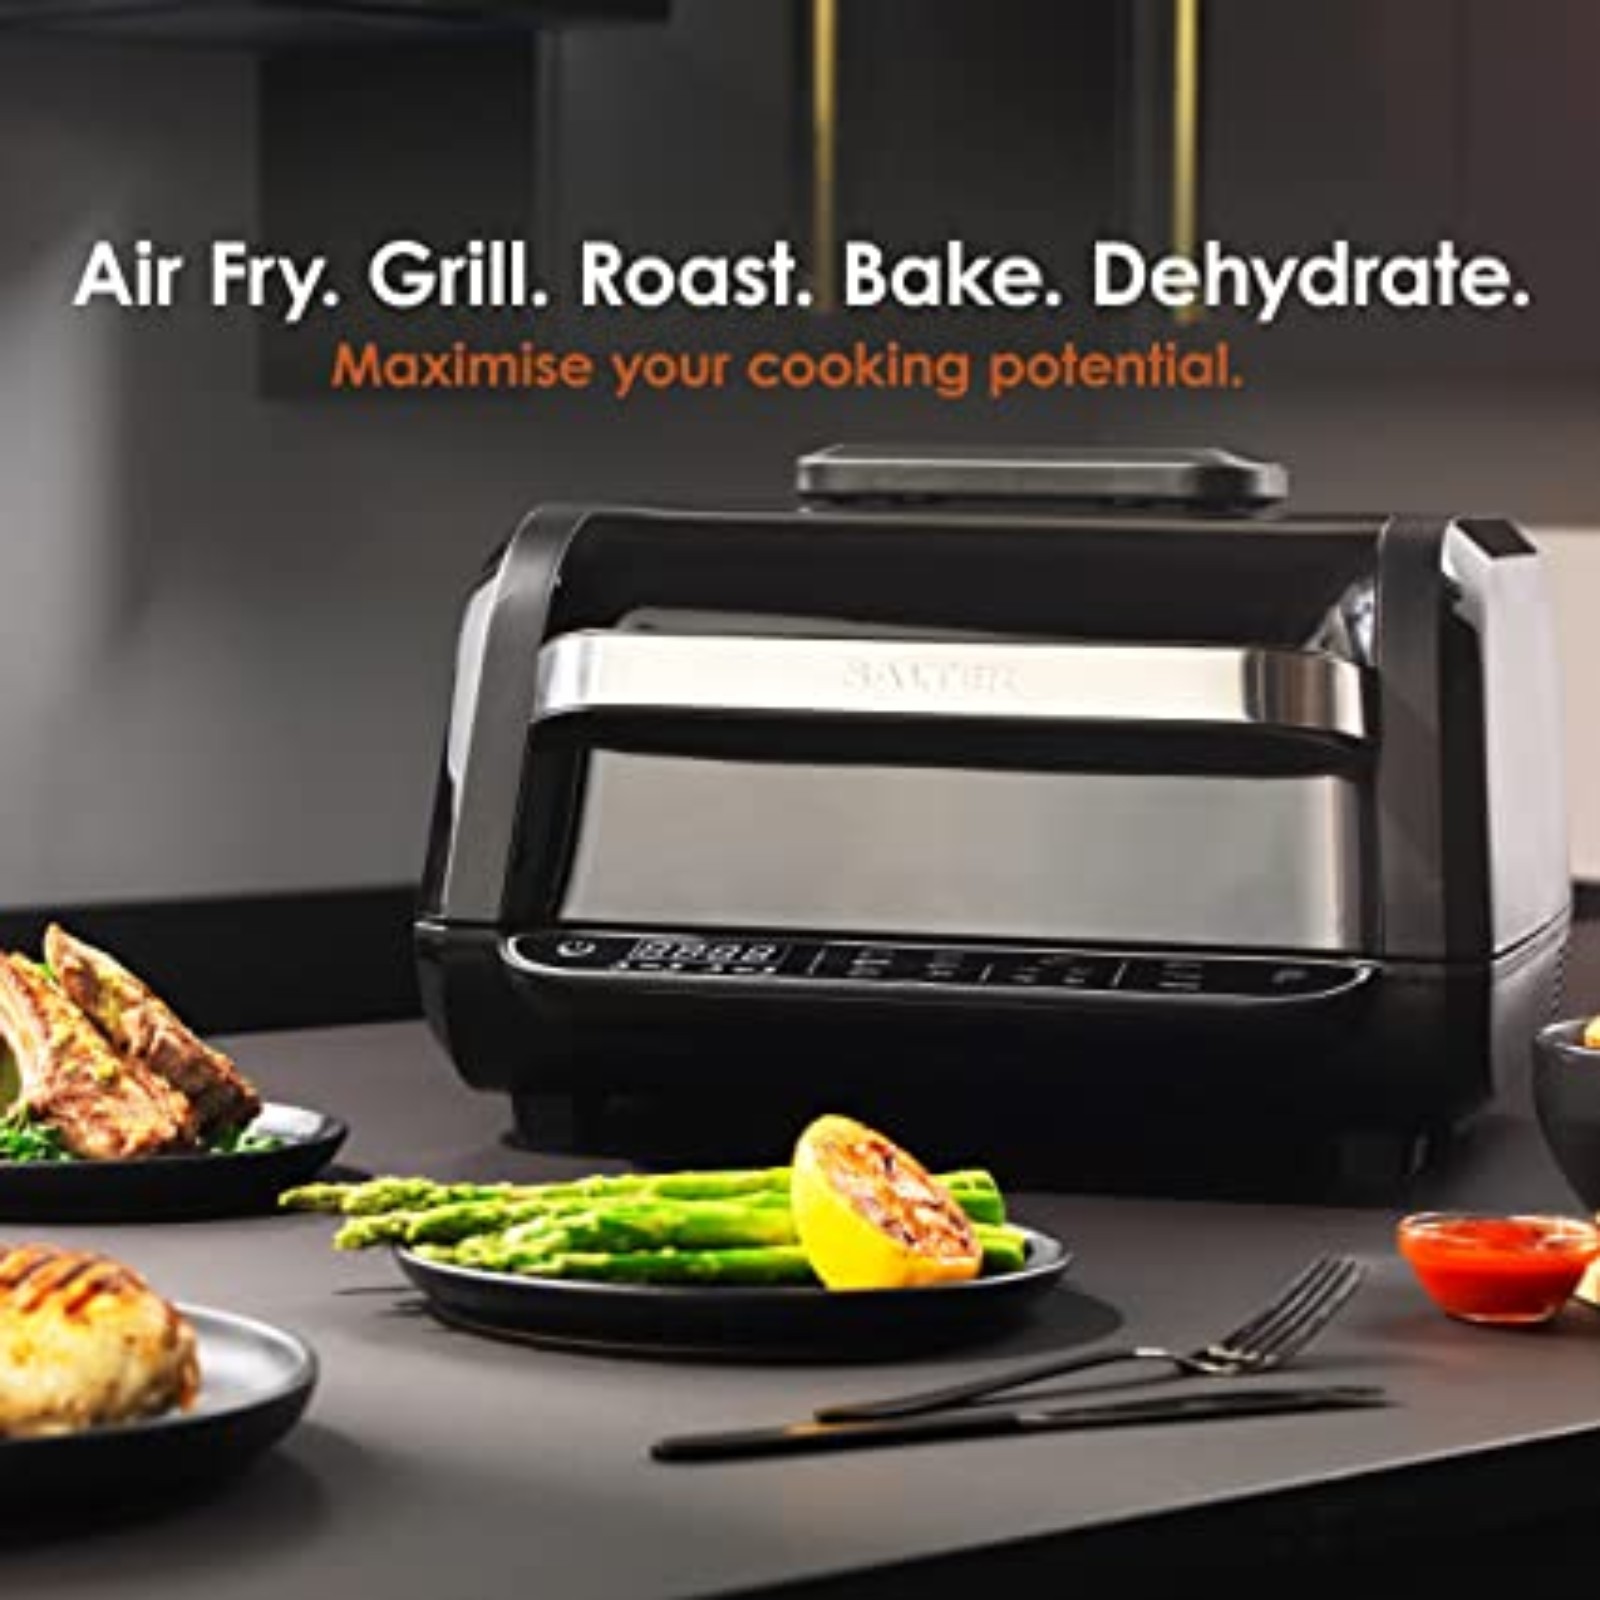 No Need to turn oven on, The Salter Aero Grill does it all - Salter